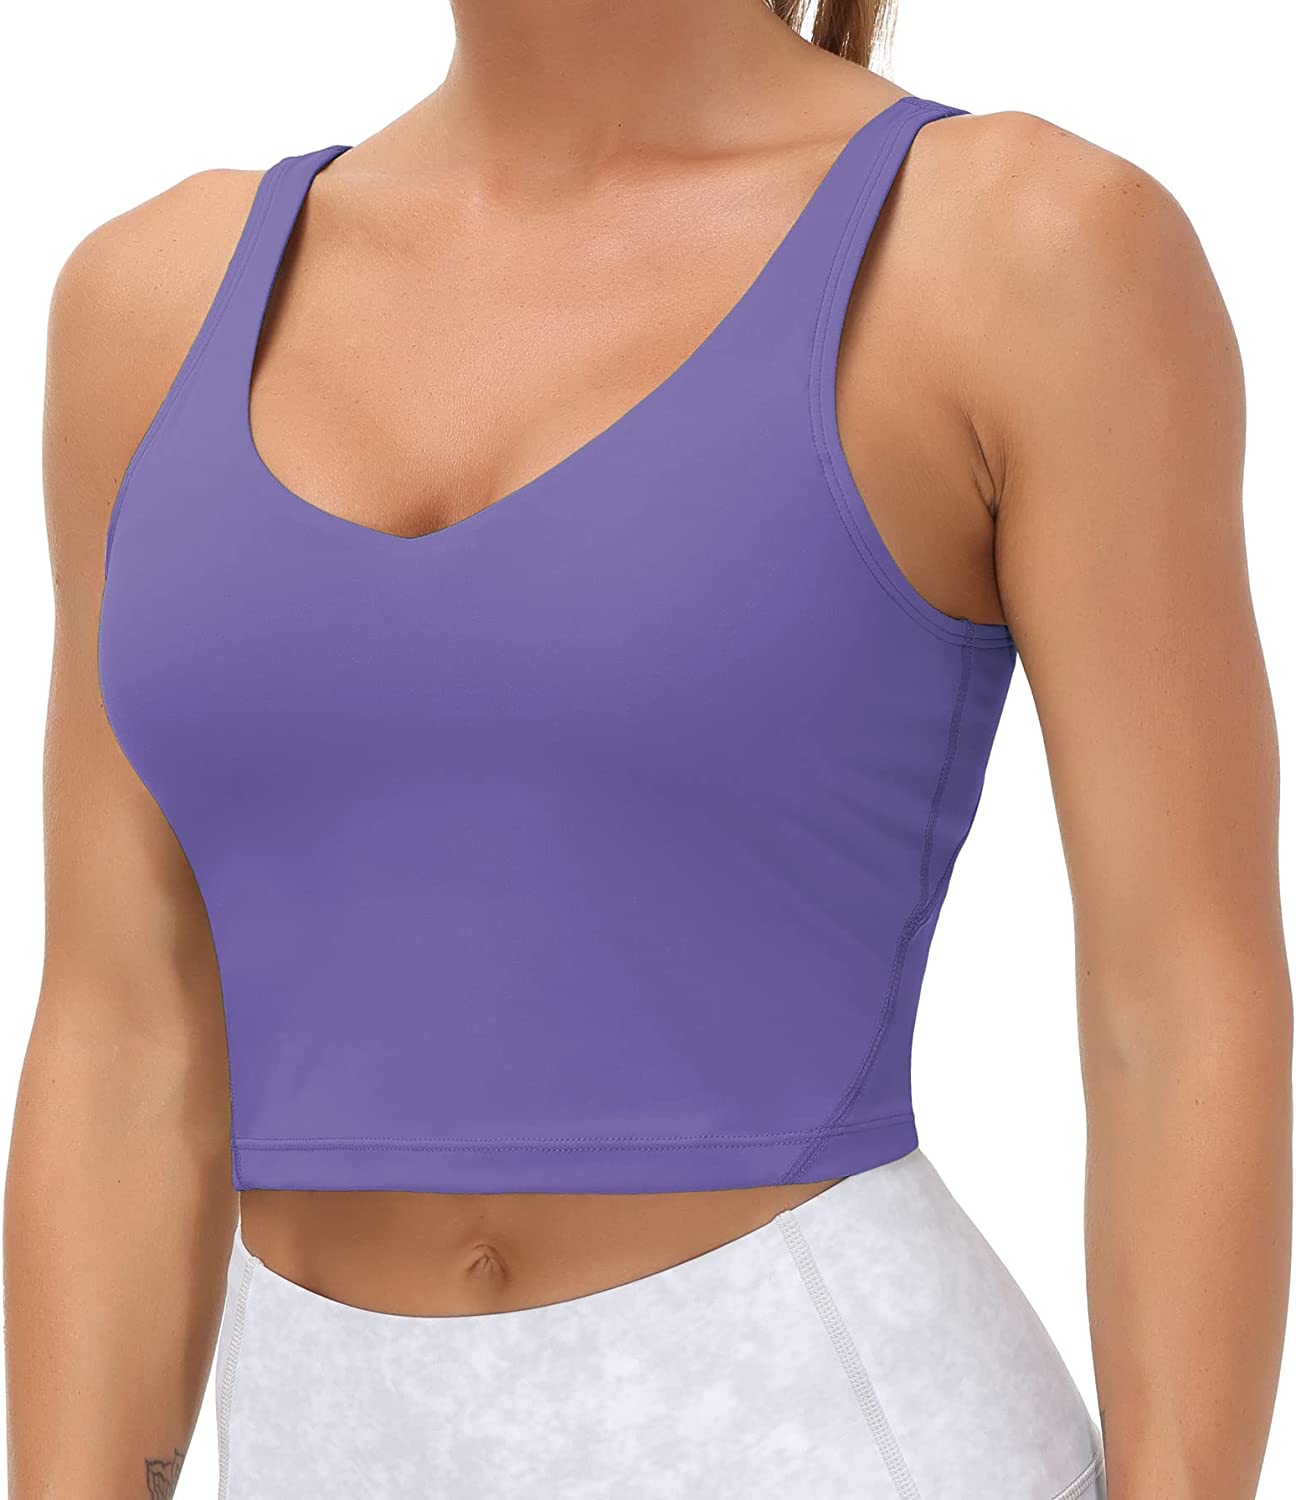  Tops, The Gym People Longline Wirefree Padded Sports Bra Tank  Medium Support